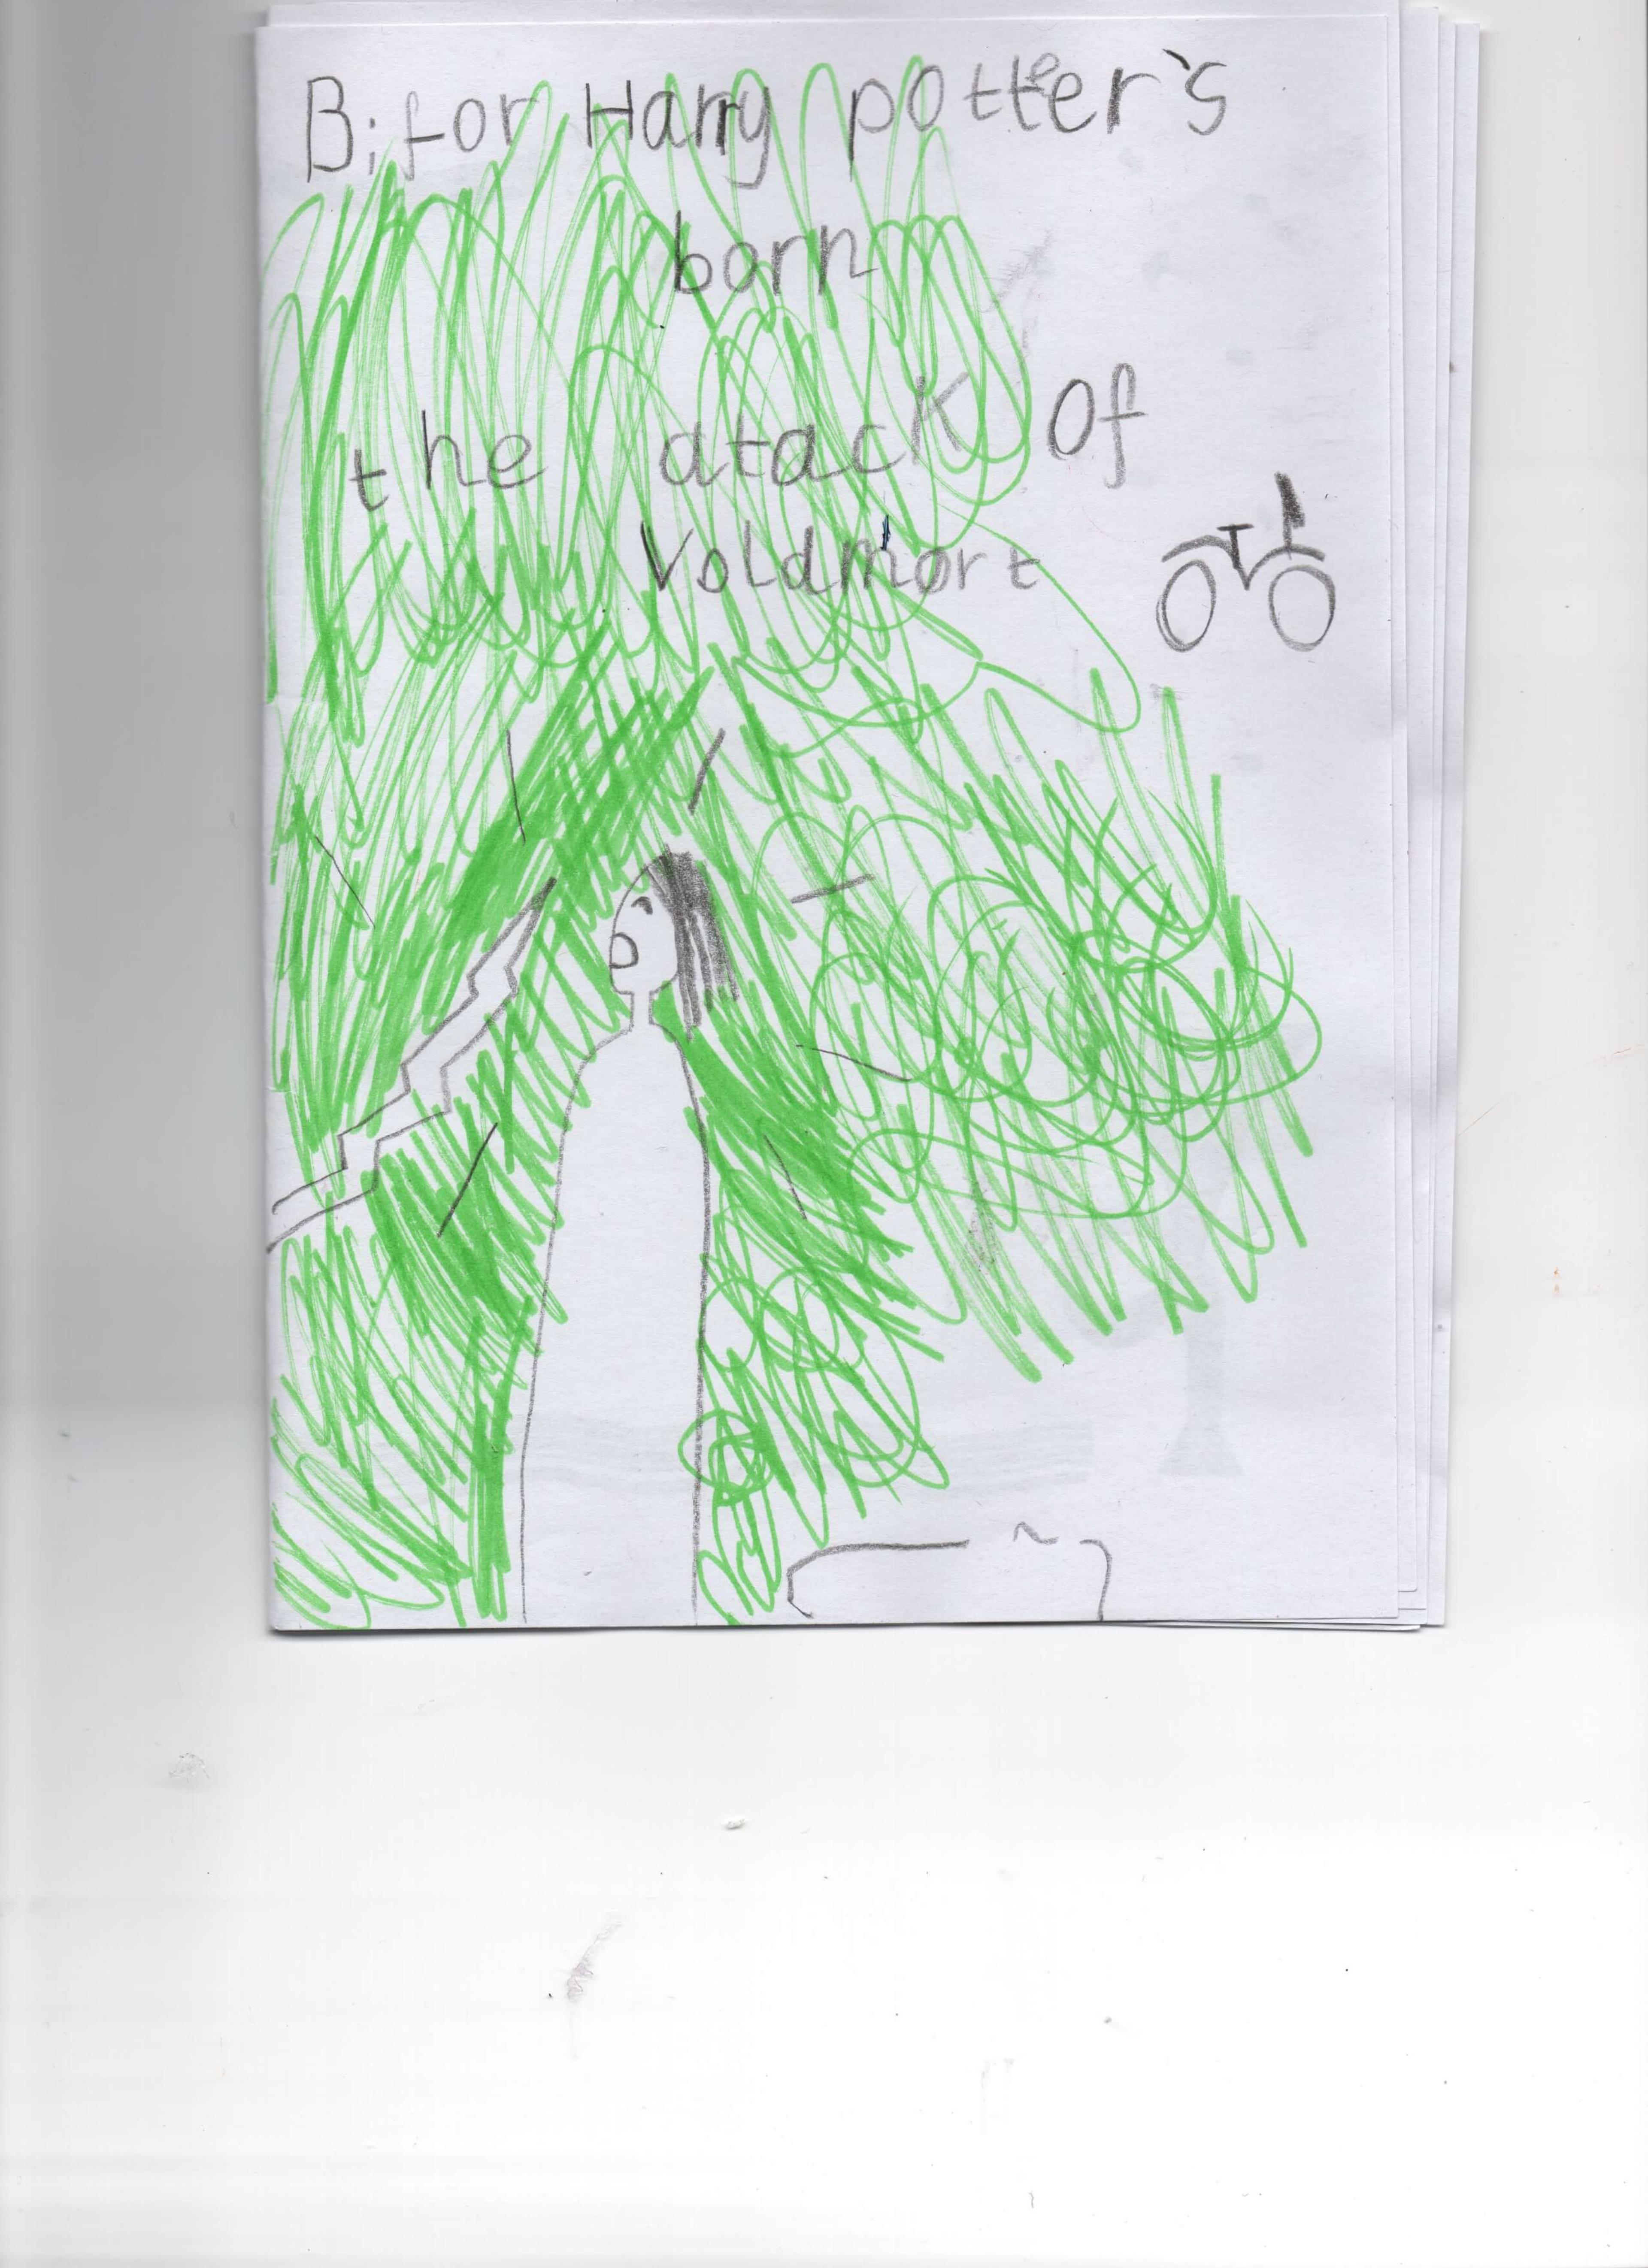 A mock book with the words "Bifore Harry Potter's born the attack of Voldemort" written in pencil. The picture includes a pencil drawing of Lily Potter, seen from the side, surrounded by bright green.